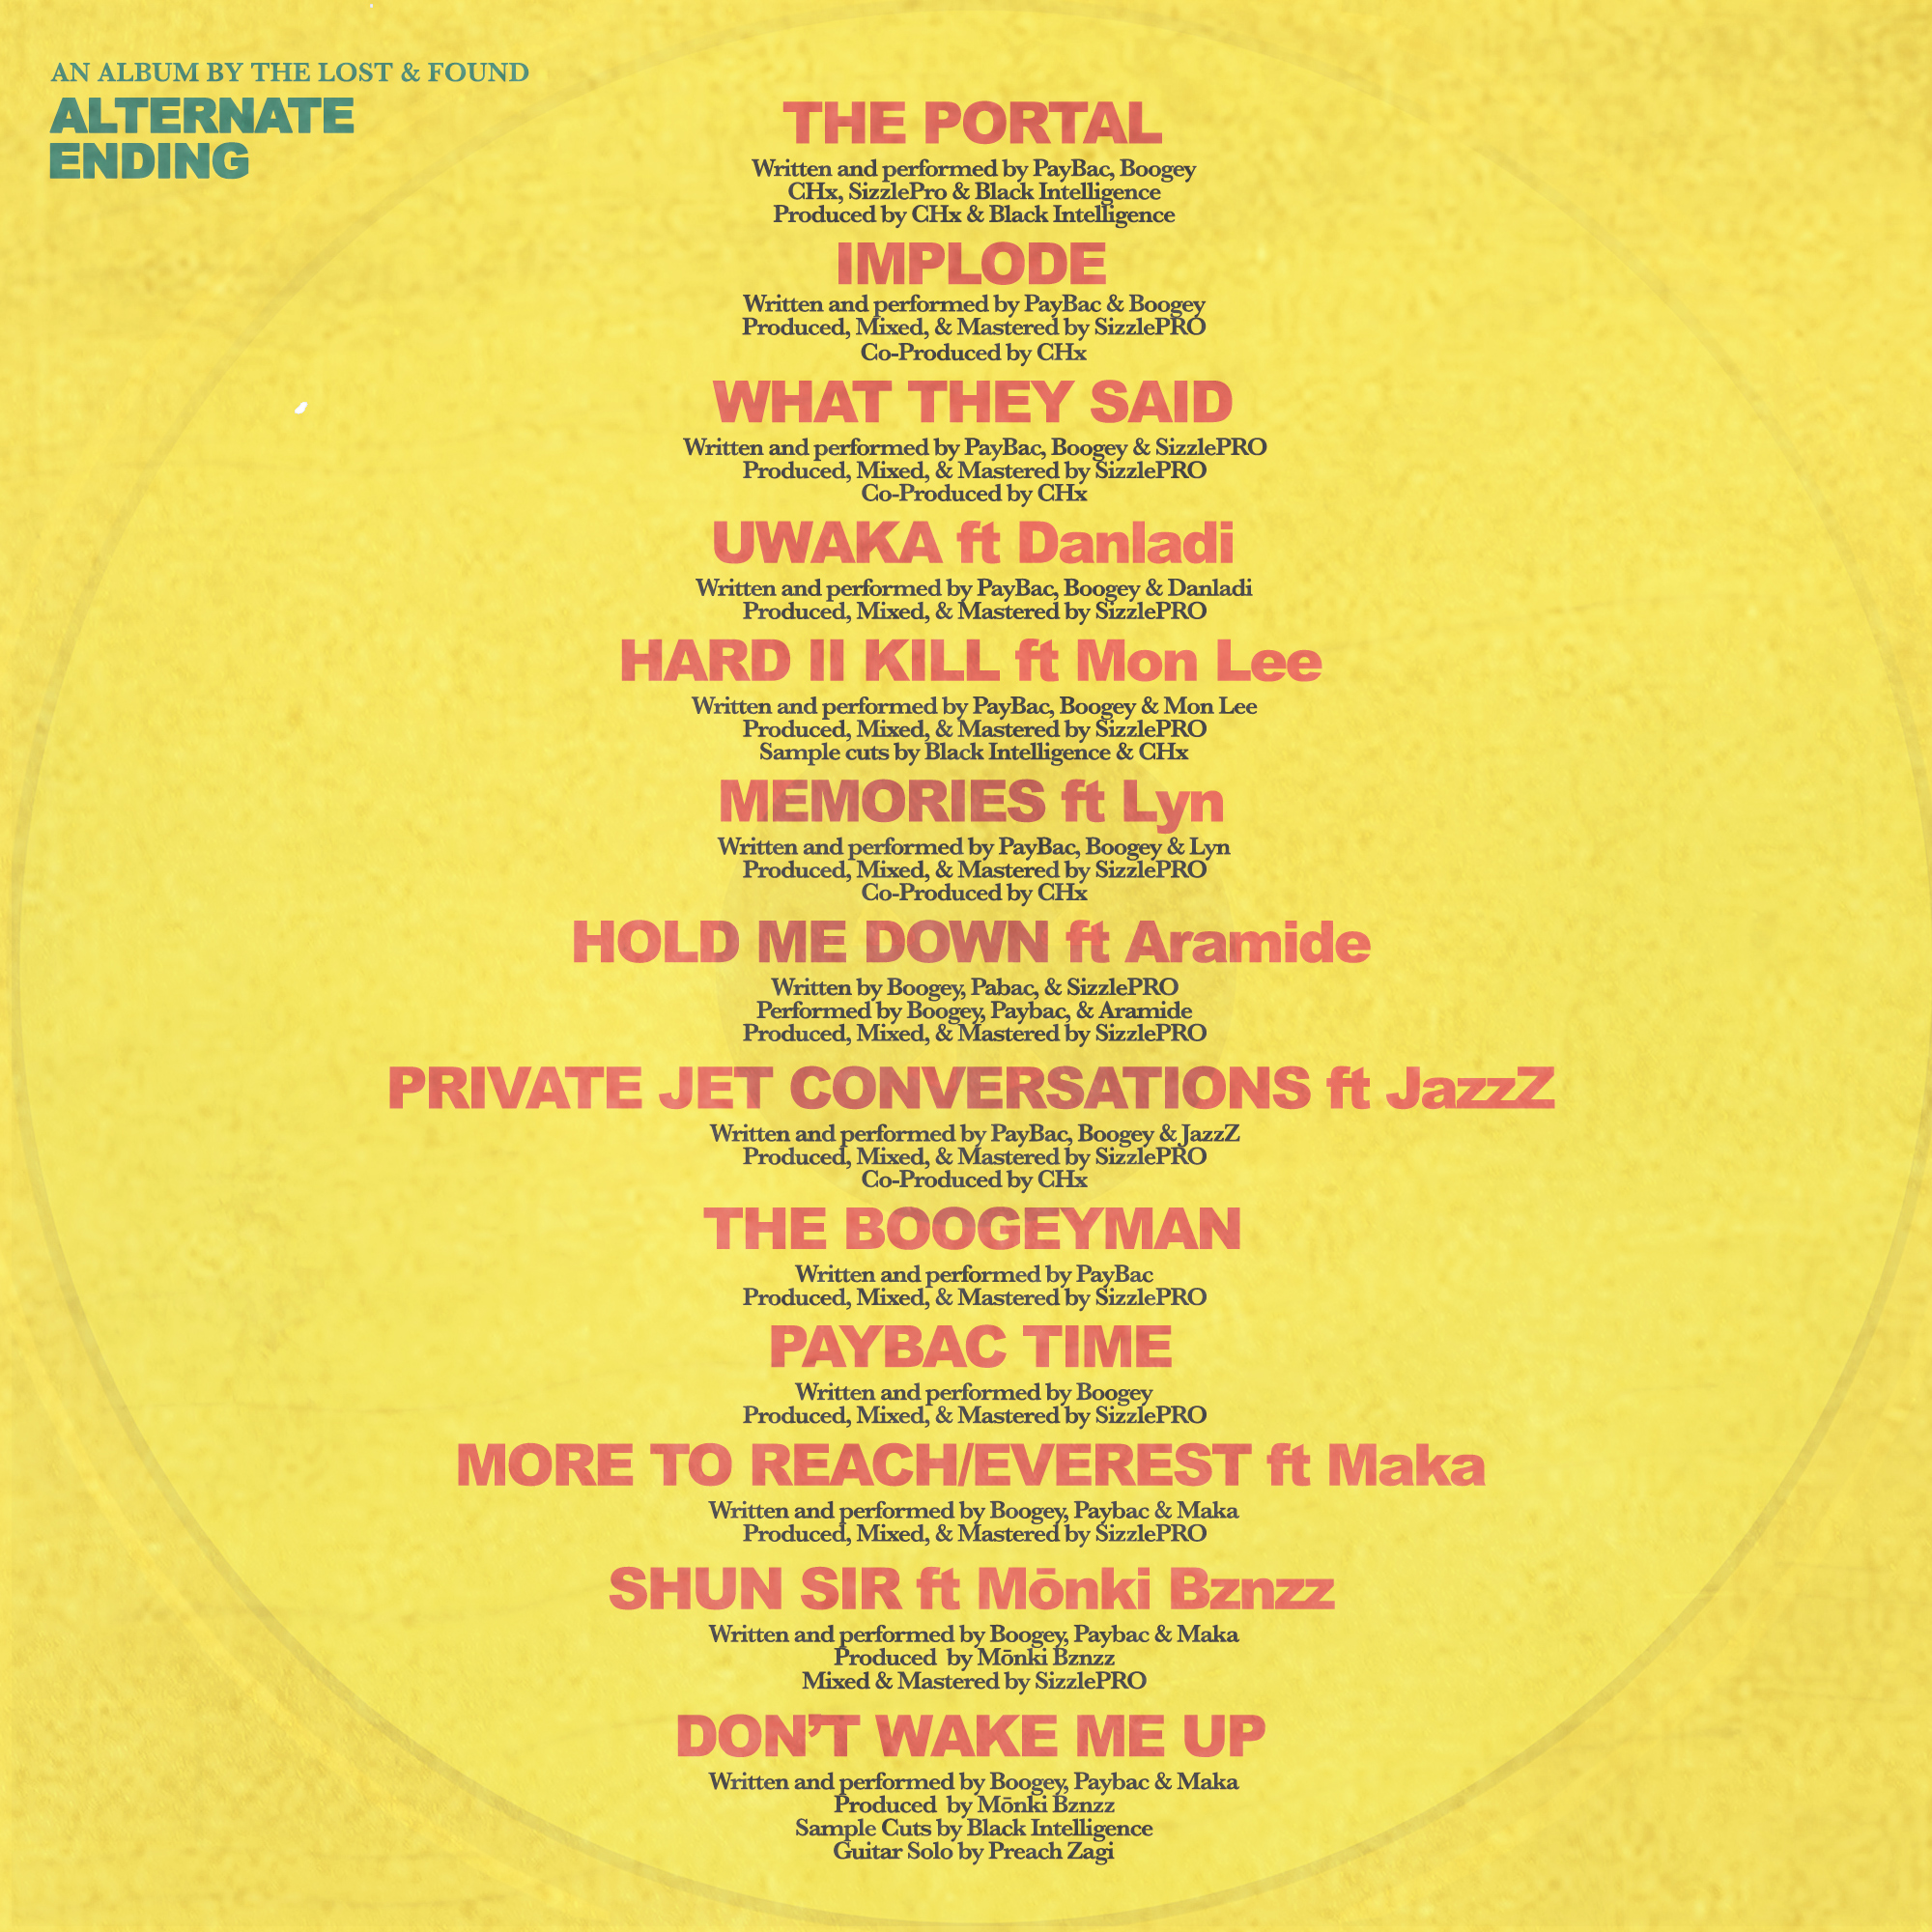 The track list and credits for 'Alternate Ending' by The Lost and Found (Boogey and Paybac). (The Lost and Found)